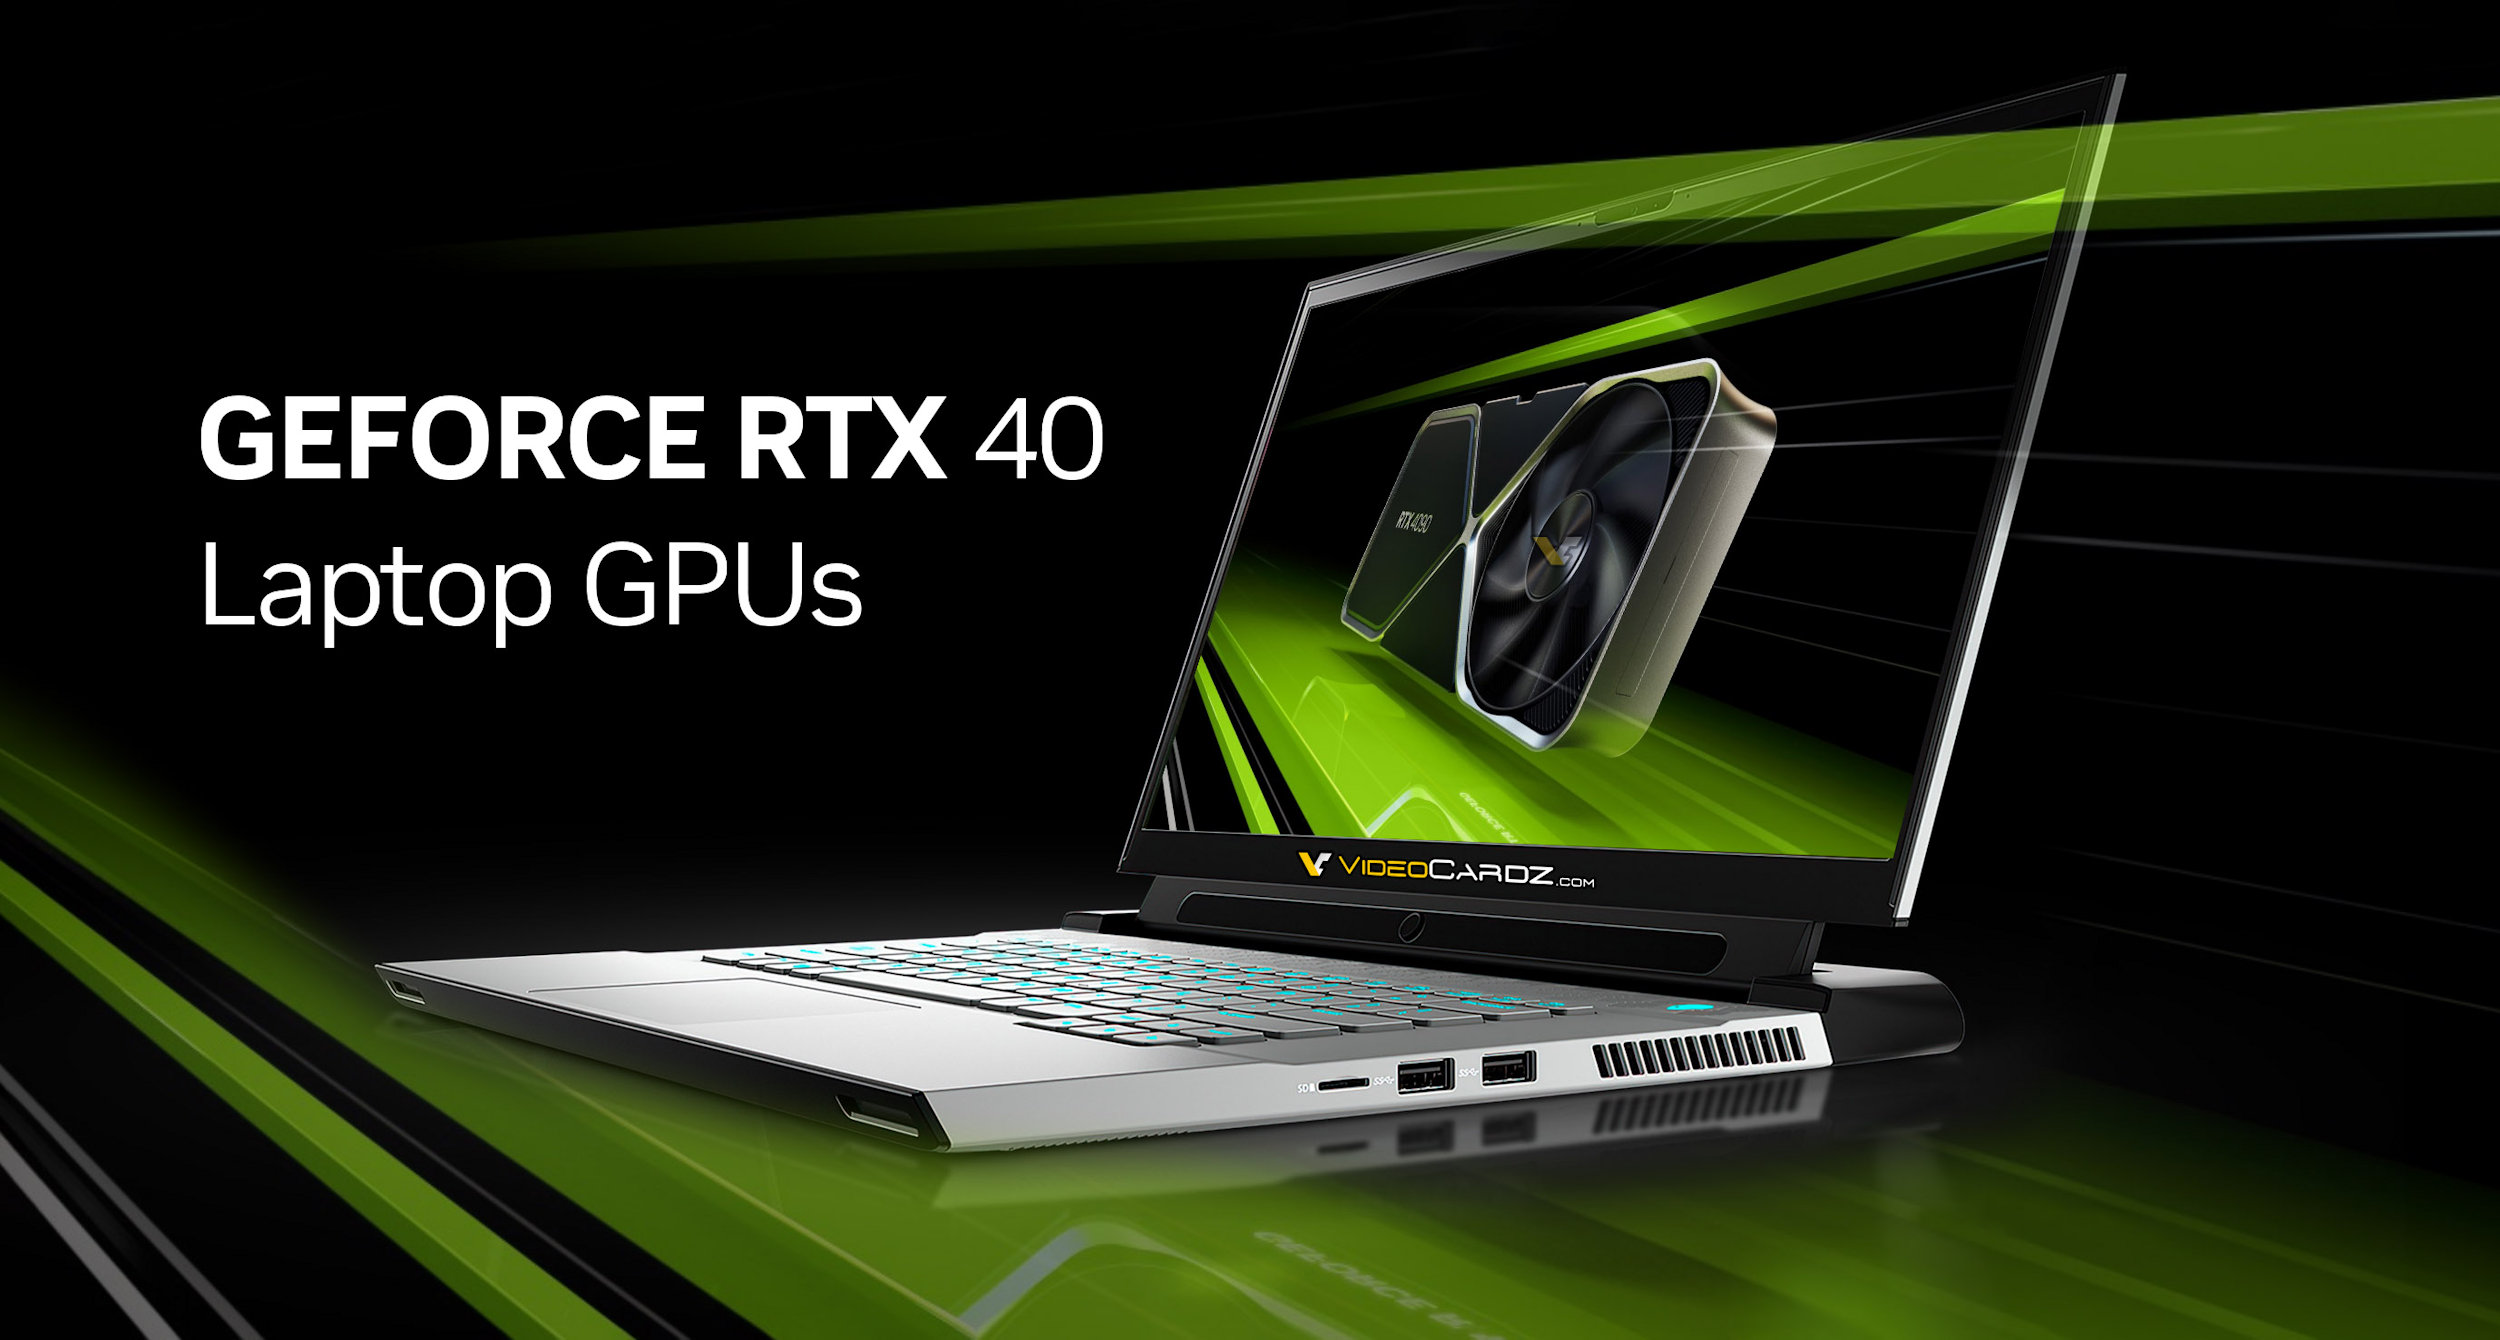 NVIDIA GeForce RTX 4050: Specifications, Benchmarks - Nano Compare